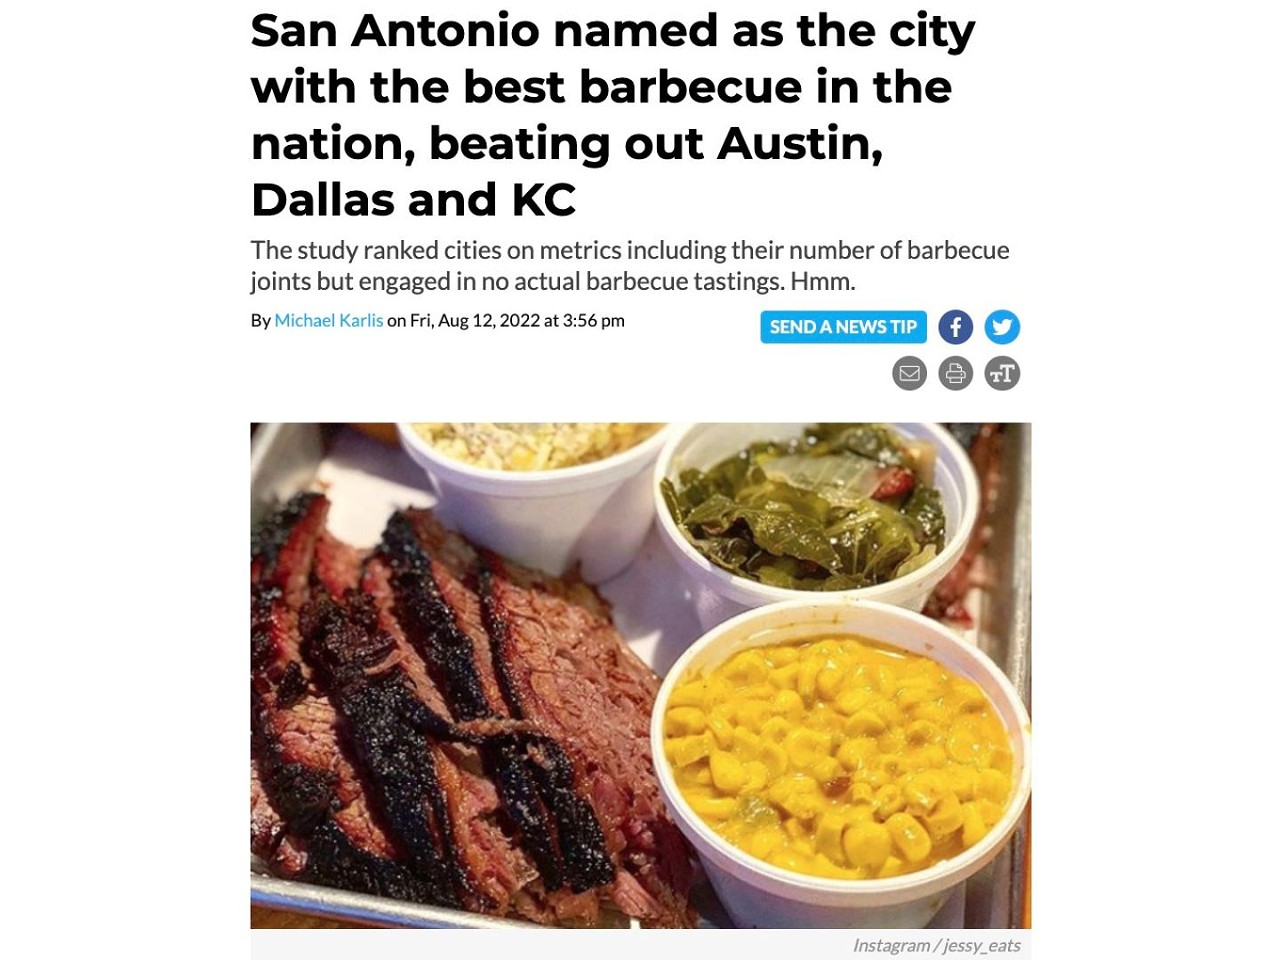 17. San Antonio named as the city with the best barbecue in the nation, beating out Austin, Dallas and KC